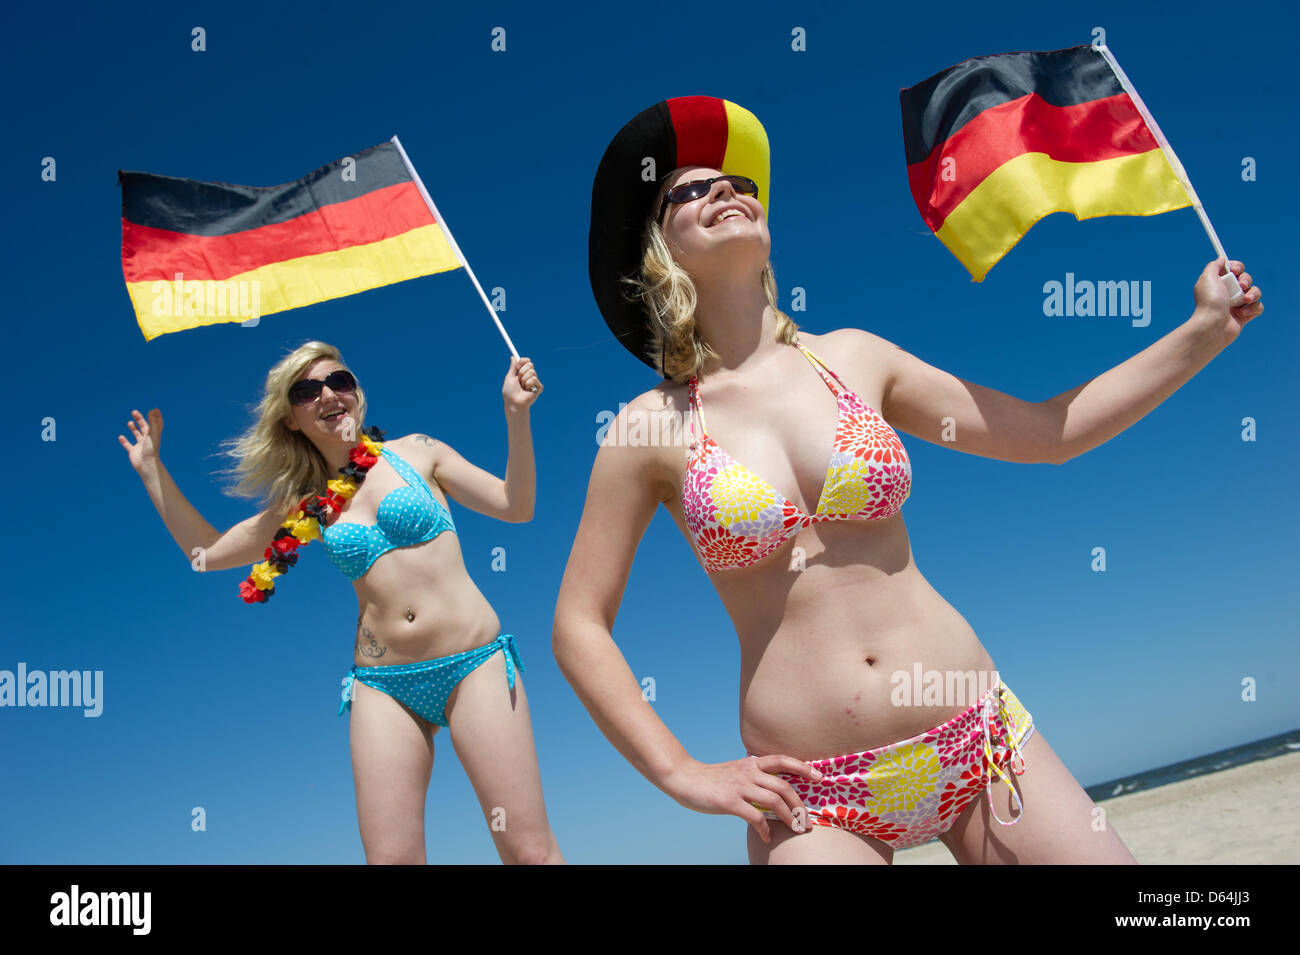 ILLUSTRATION - Natalie and Jule (L-R) hold German flags in preparation for the European Championships at the Baltic Sea beach of Trassenheide, Germany, 25 May 2012. Public broadcaster ZDF plans to cover the Euro 2012 and additional programmes from the Island of Usedom. Photo: Stefan Sauer Stock Photo